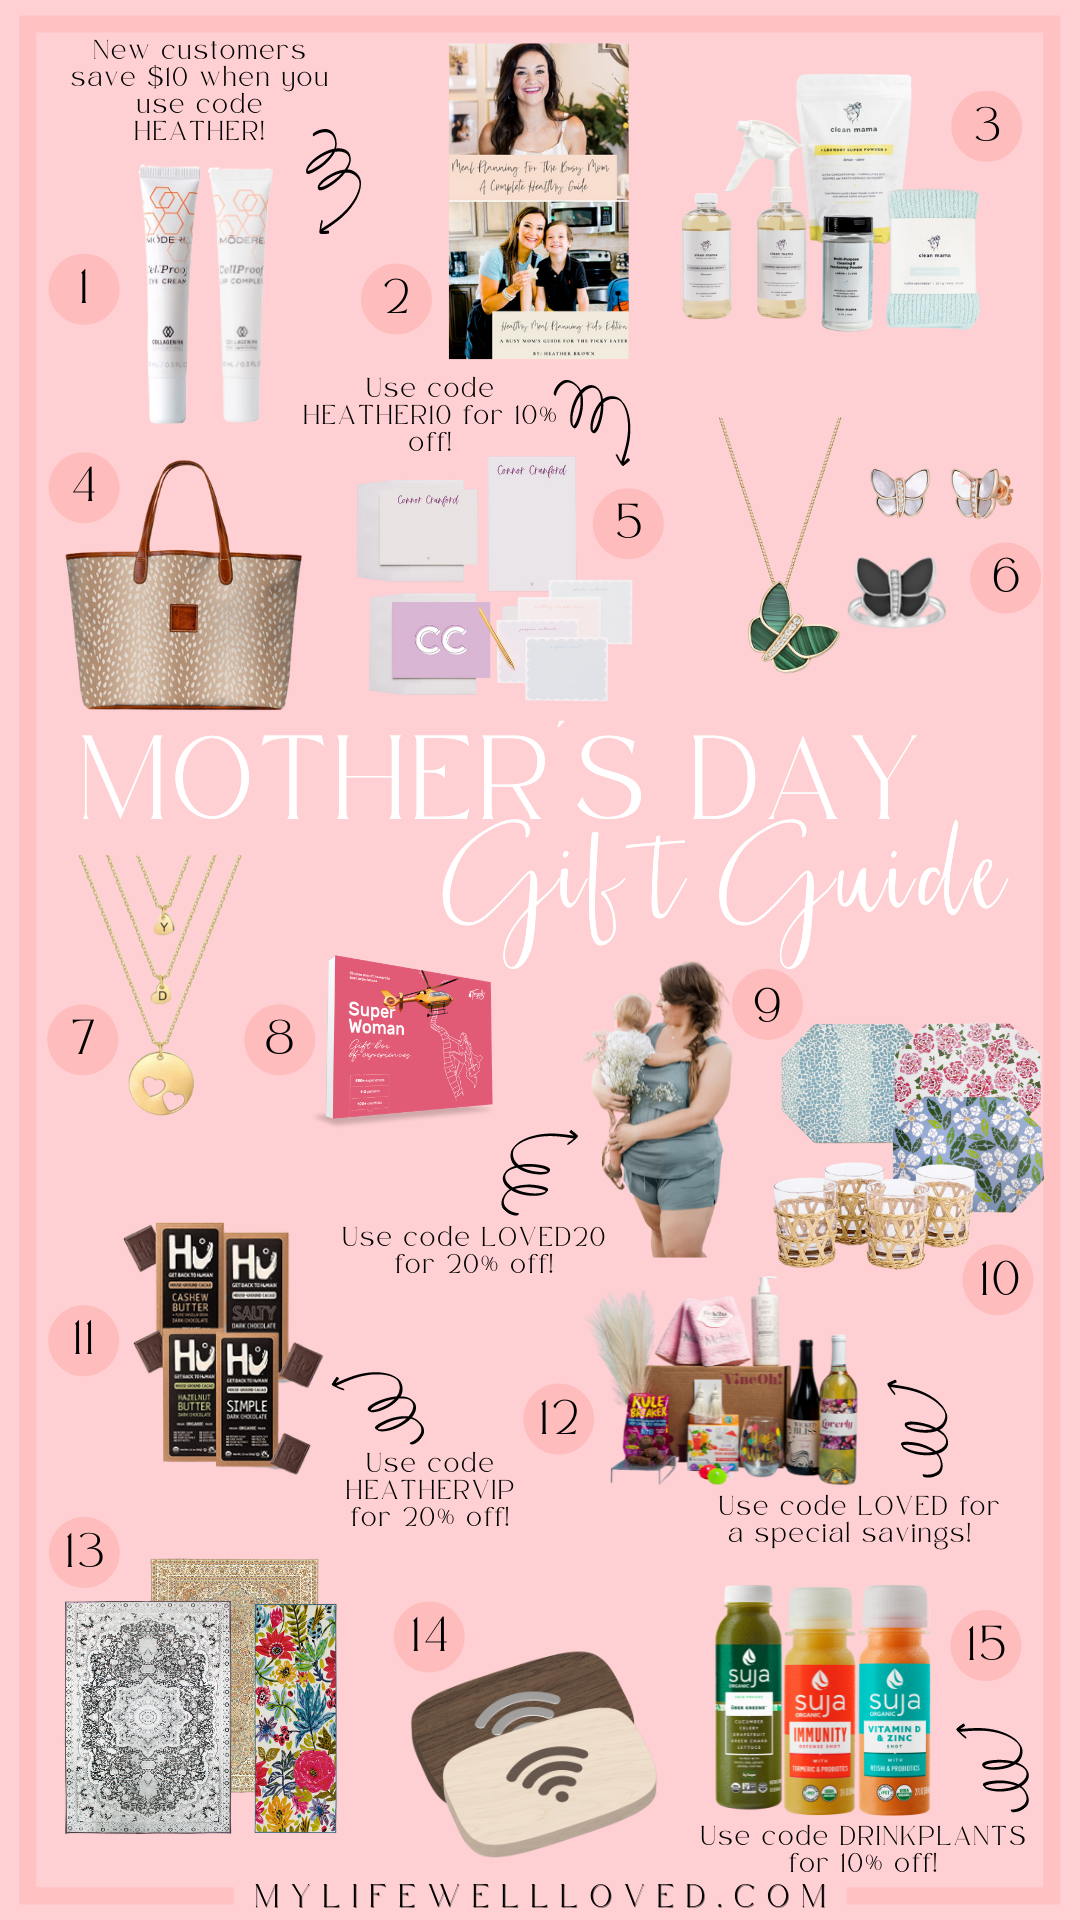 10+ Stylish and Affordable Gift Ideas for Mother's Day - Curbly